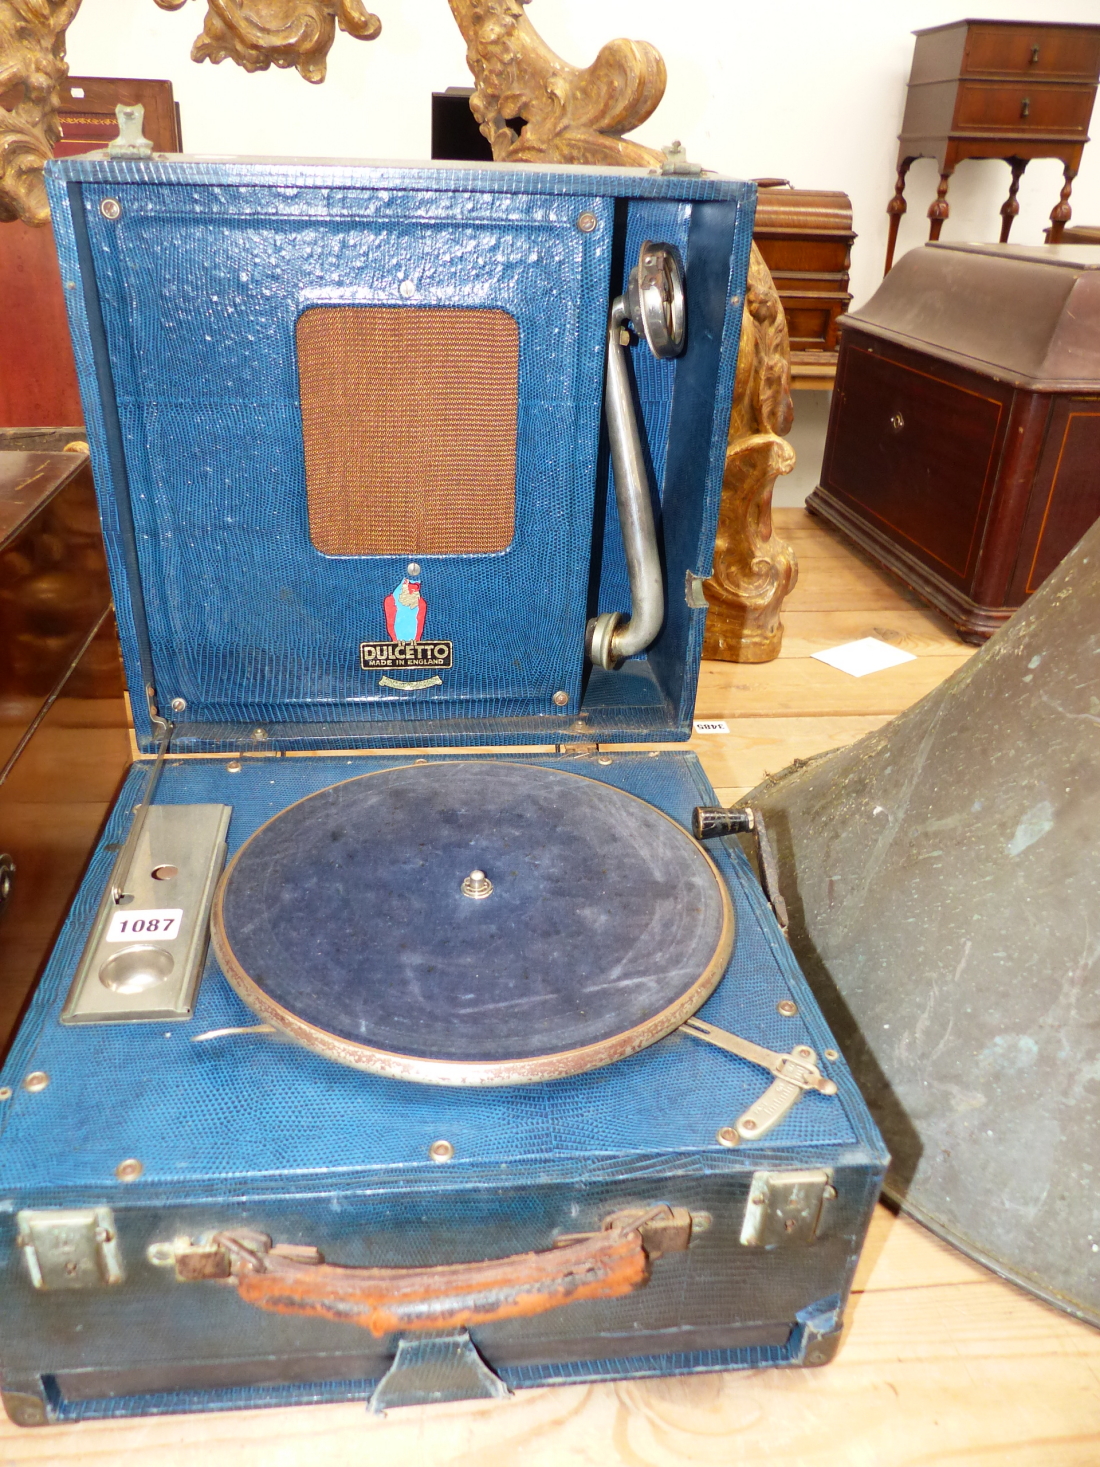 A BLUE LEATHERETTE CASED DULCETTO WIND UP GRAMOPHONE, THE SOUND BOX AND PLAYING ARM WITHIN THE